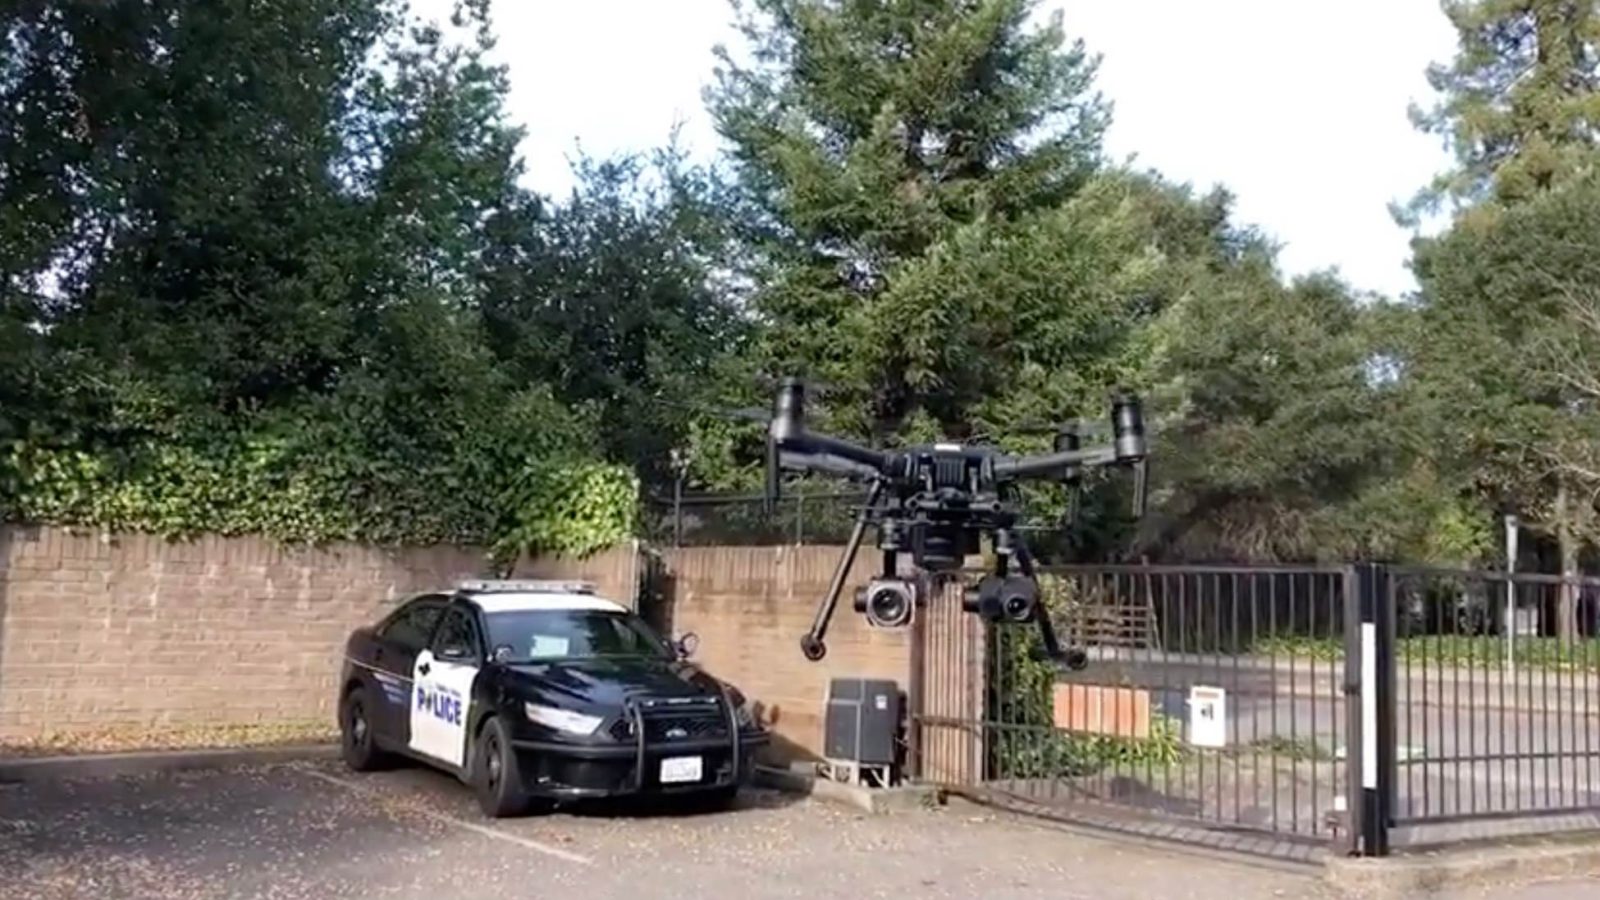 DJI Matrice 210 with Zenmuse XT2 thermal and Z30 zoom camera. ultimate police drone